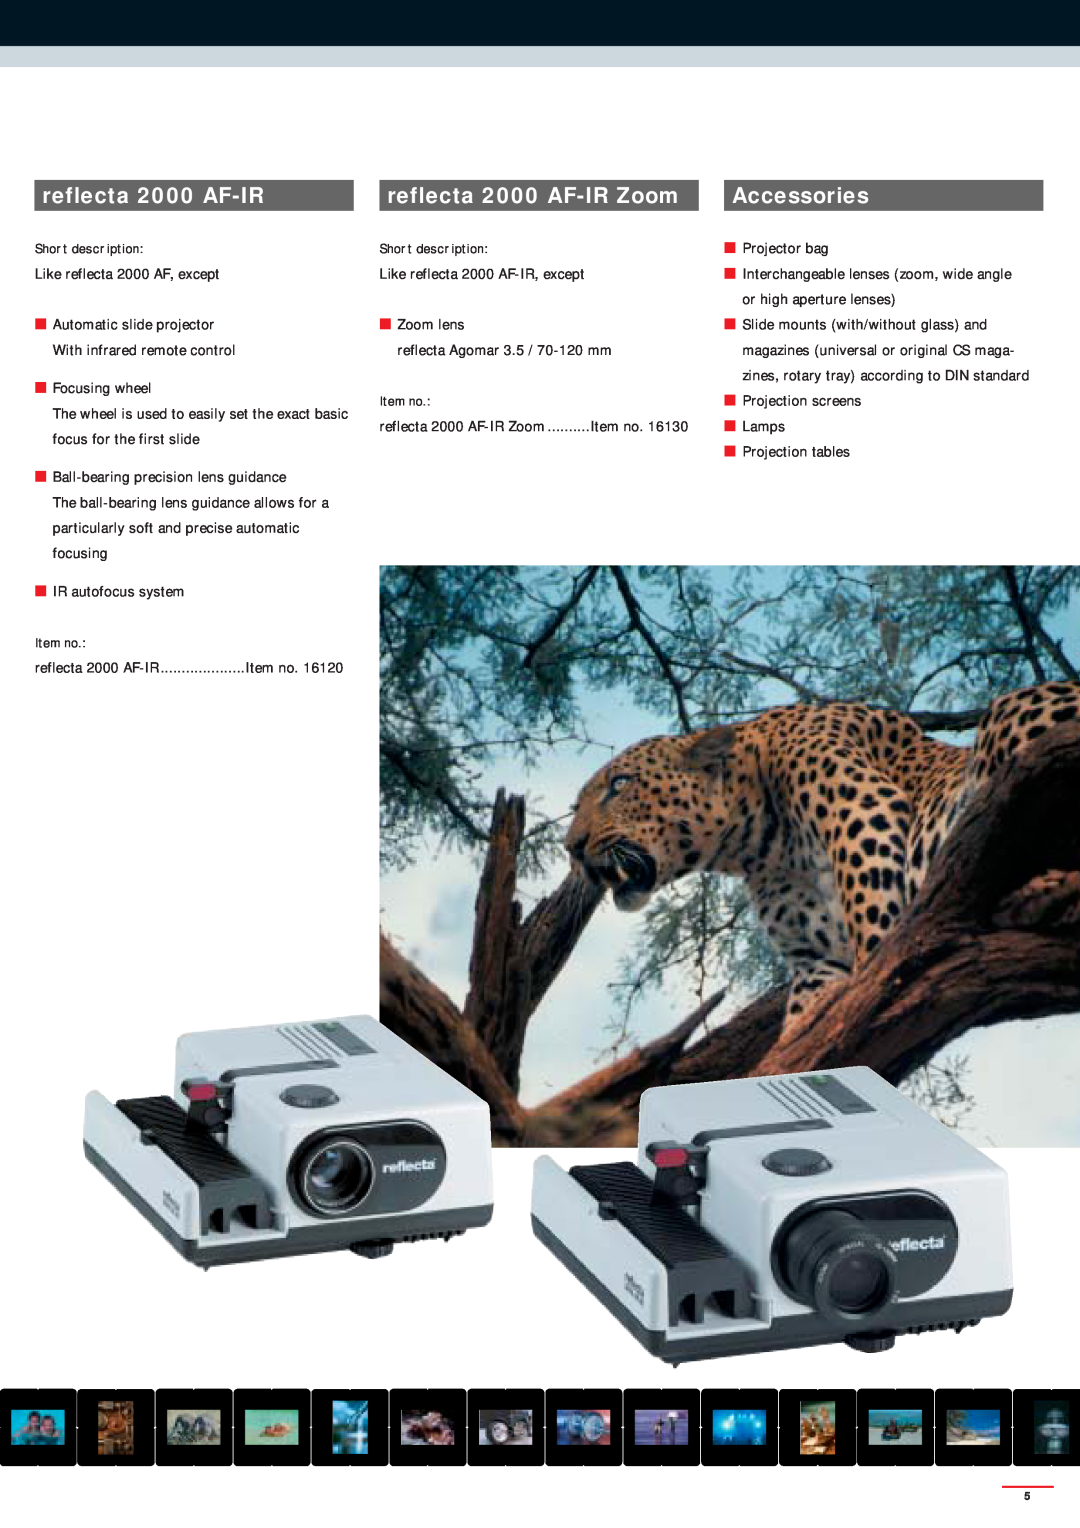 Reflecta SERIES 2000 manual reflecta 2000 AF-IR Zoom, Accessories, The wheel is used to easily set the exact basic 